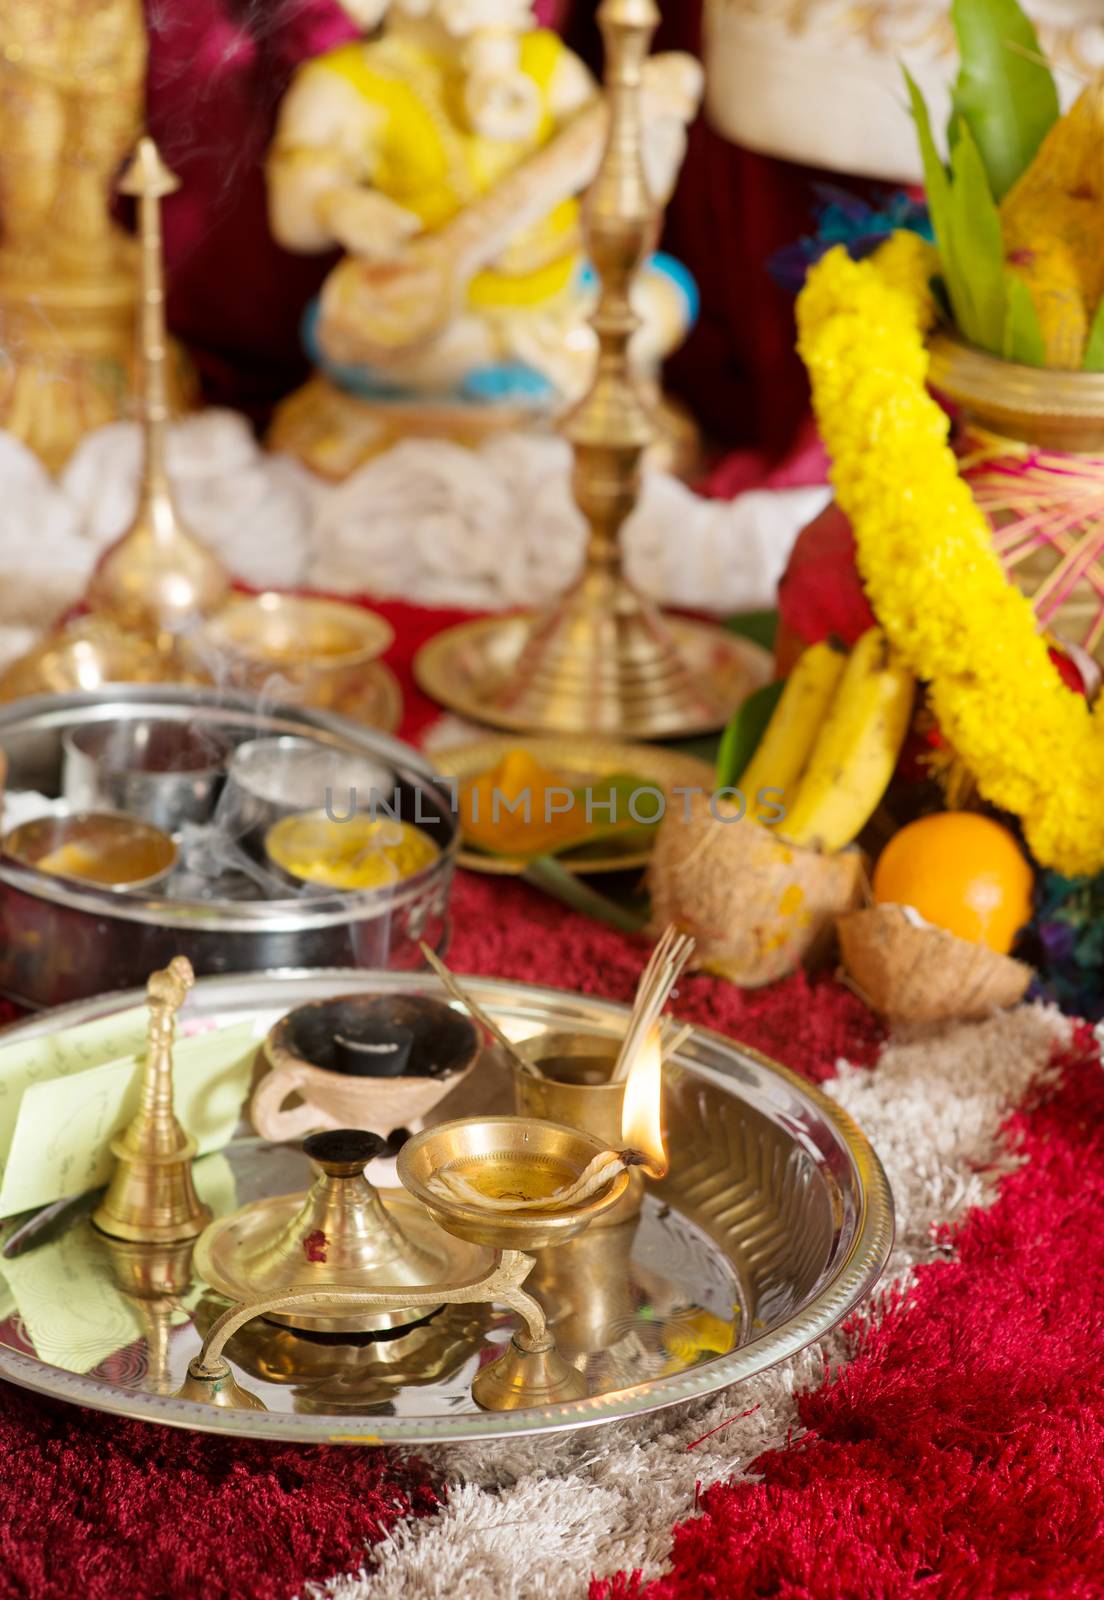 Traditional Indian Hindu religious praying items in ear piercing ceremony for children. Focus on the oil lamp. India special rituals events.